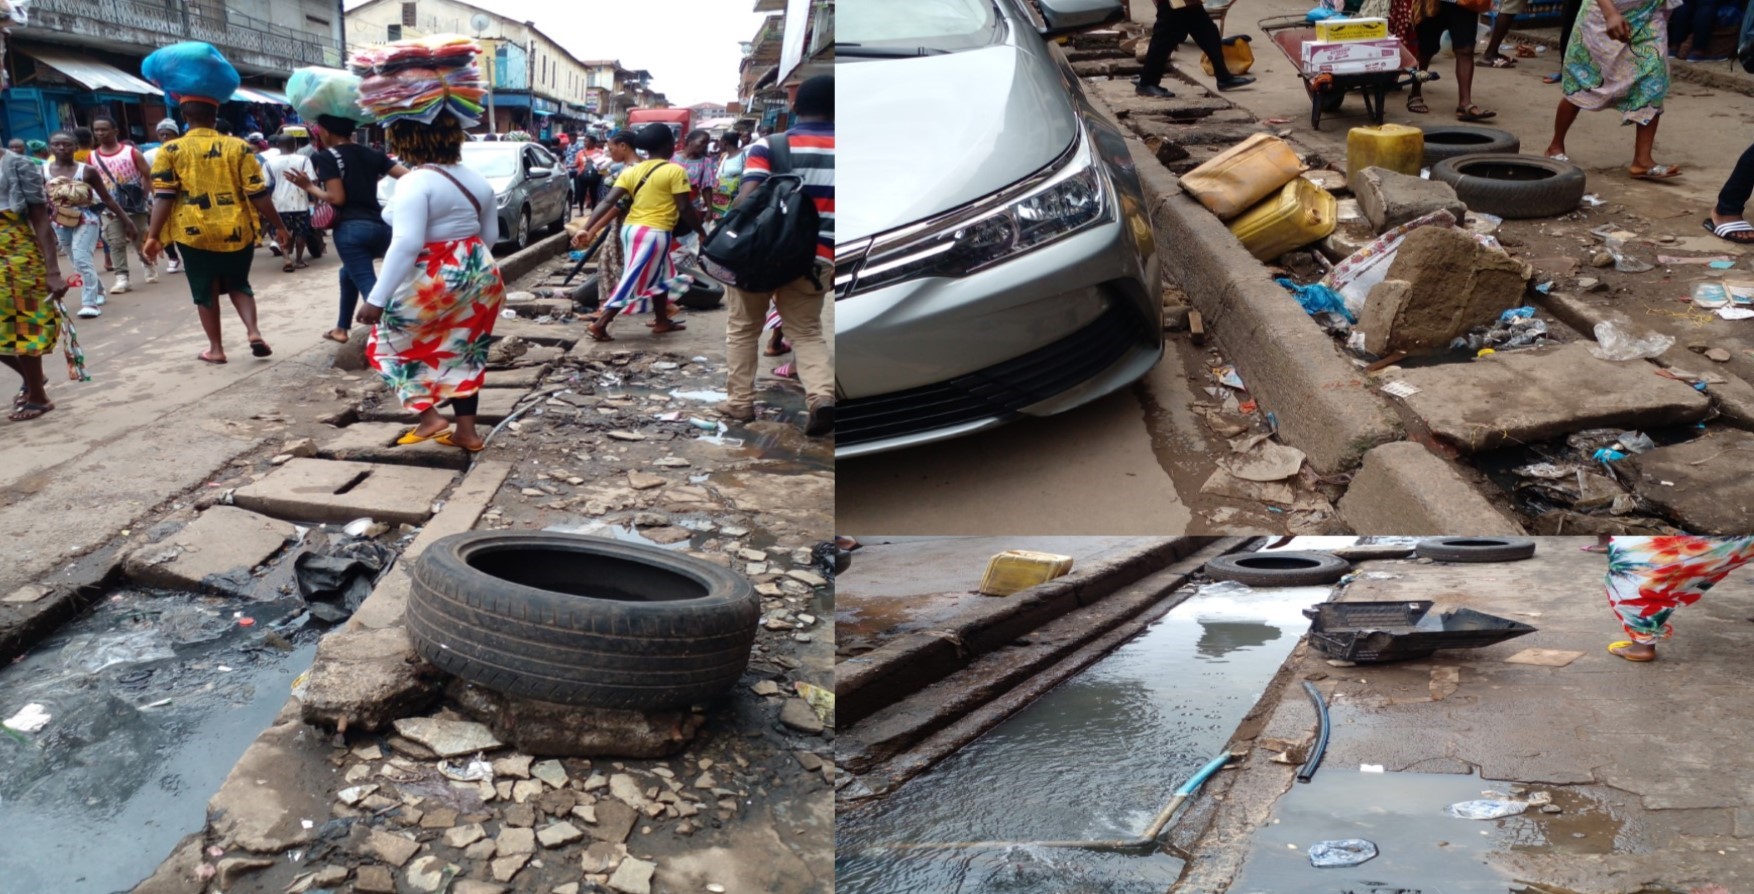 TRACEJoenal: Time To Clean Up The Mess At Sani Abacha Street